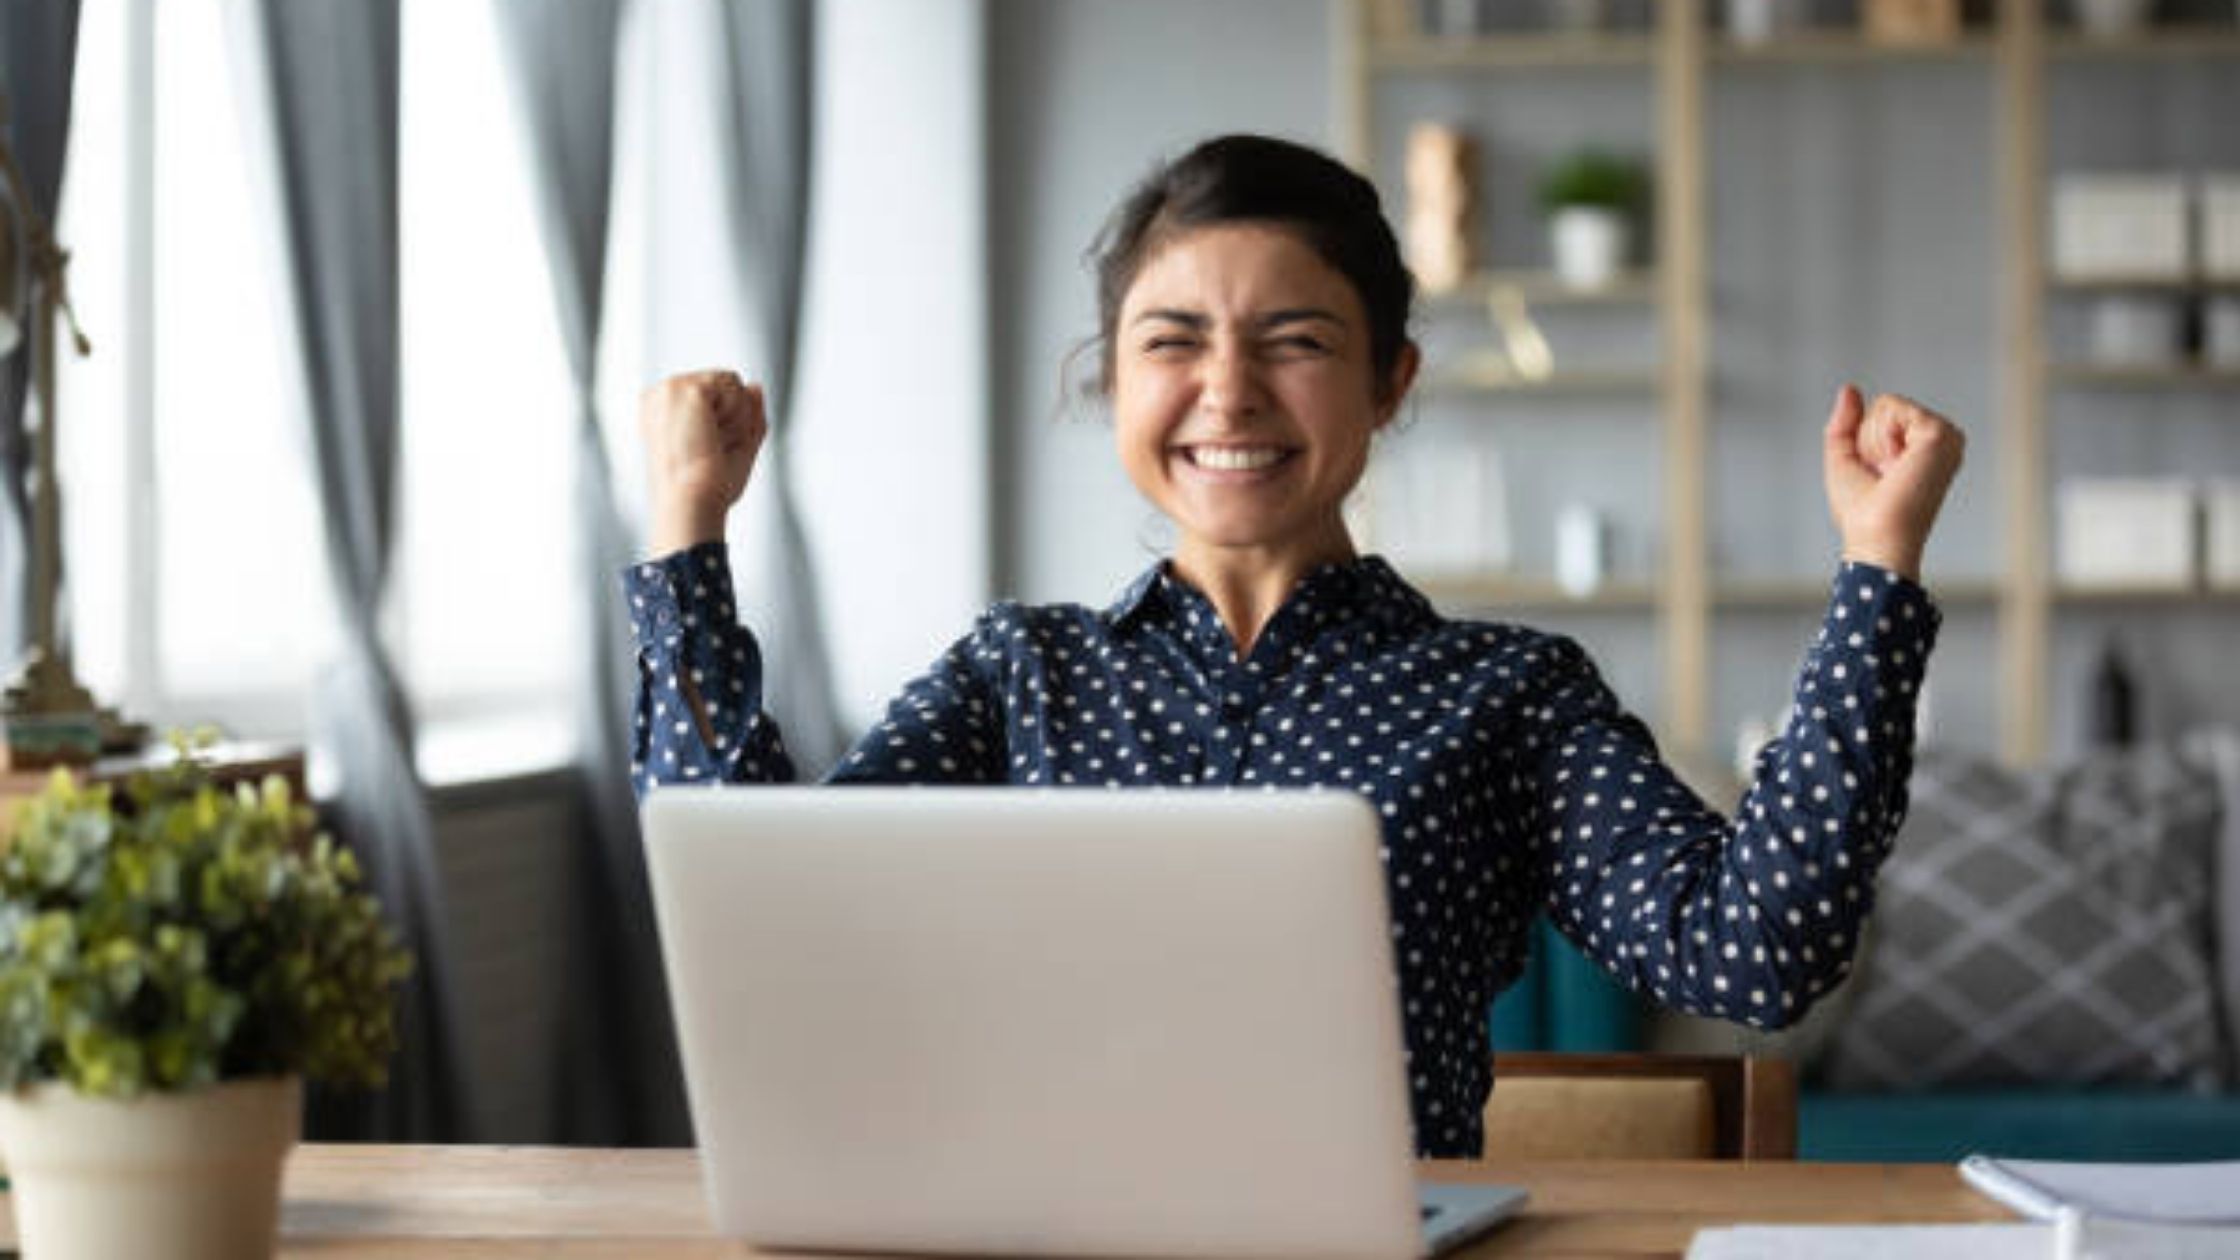 A joyful woman at a desk with her laptop, raising her fists in victory after identify reasons why her email is sent but not received by the recipient.